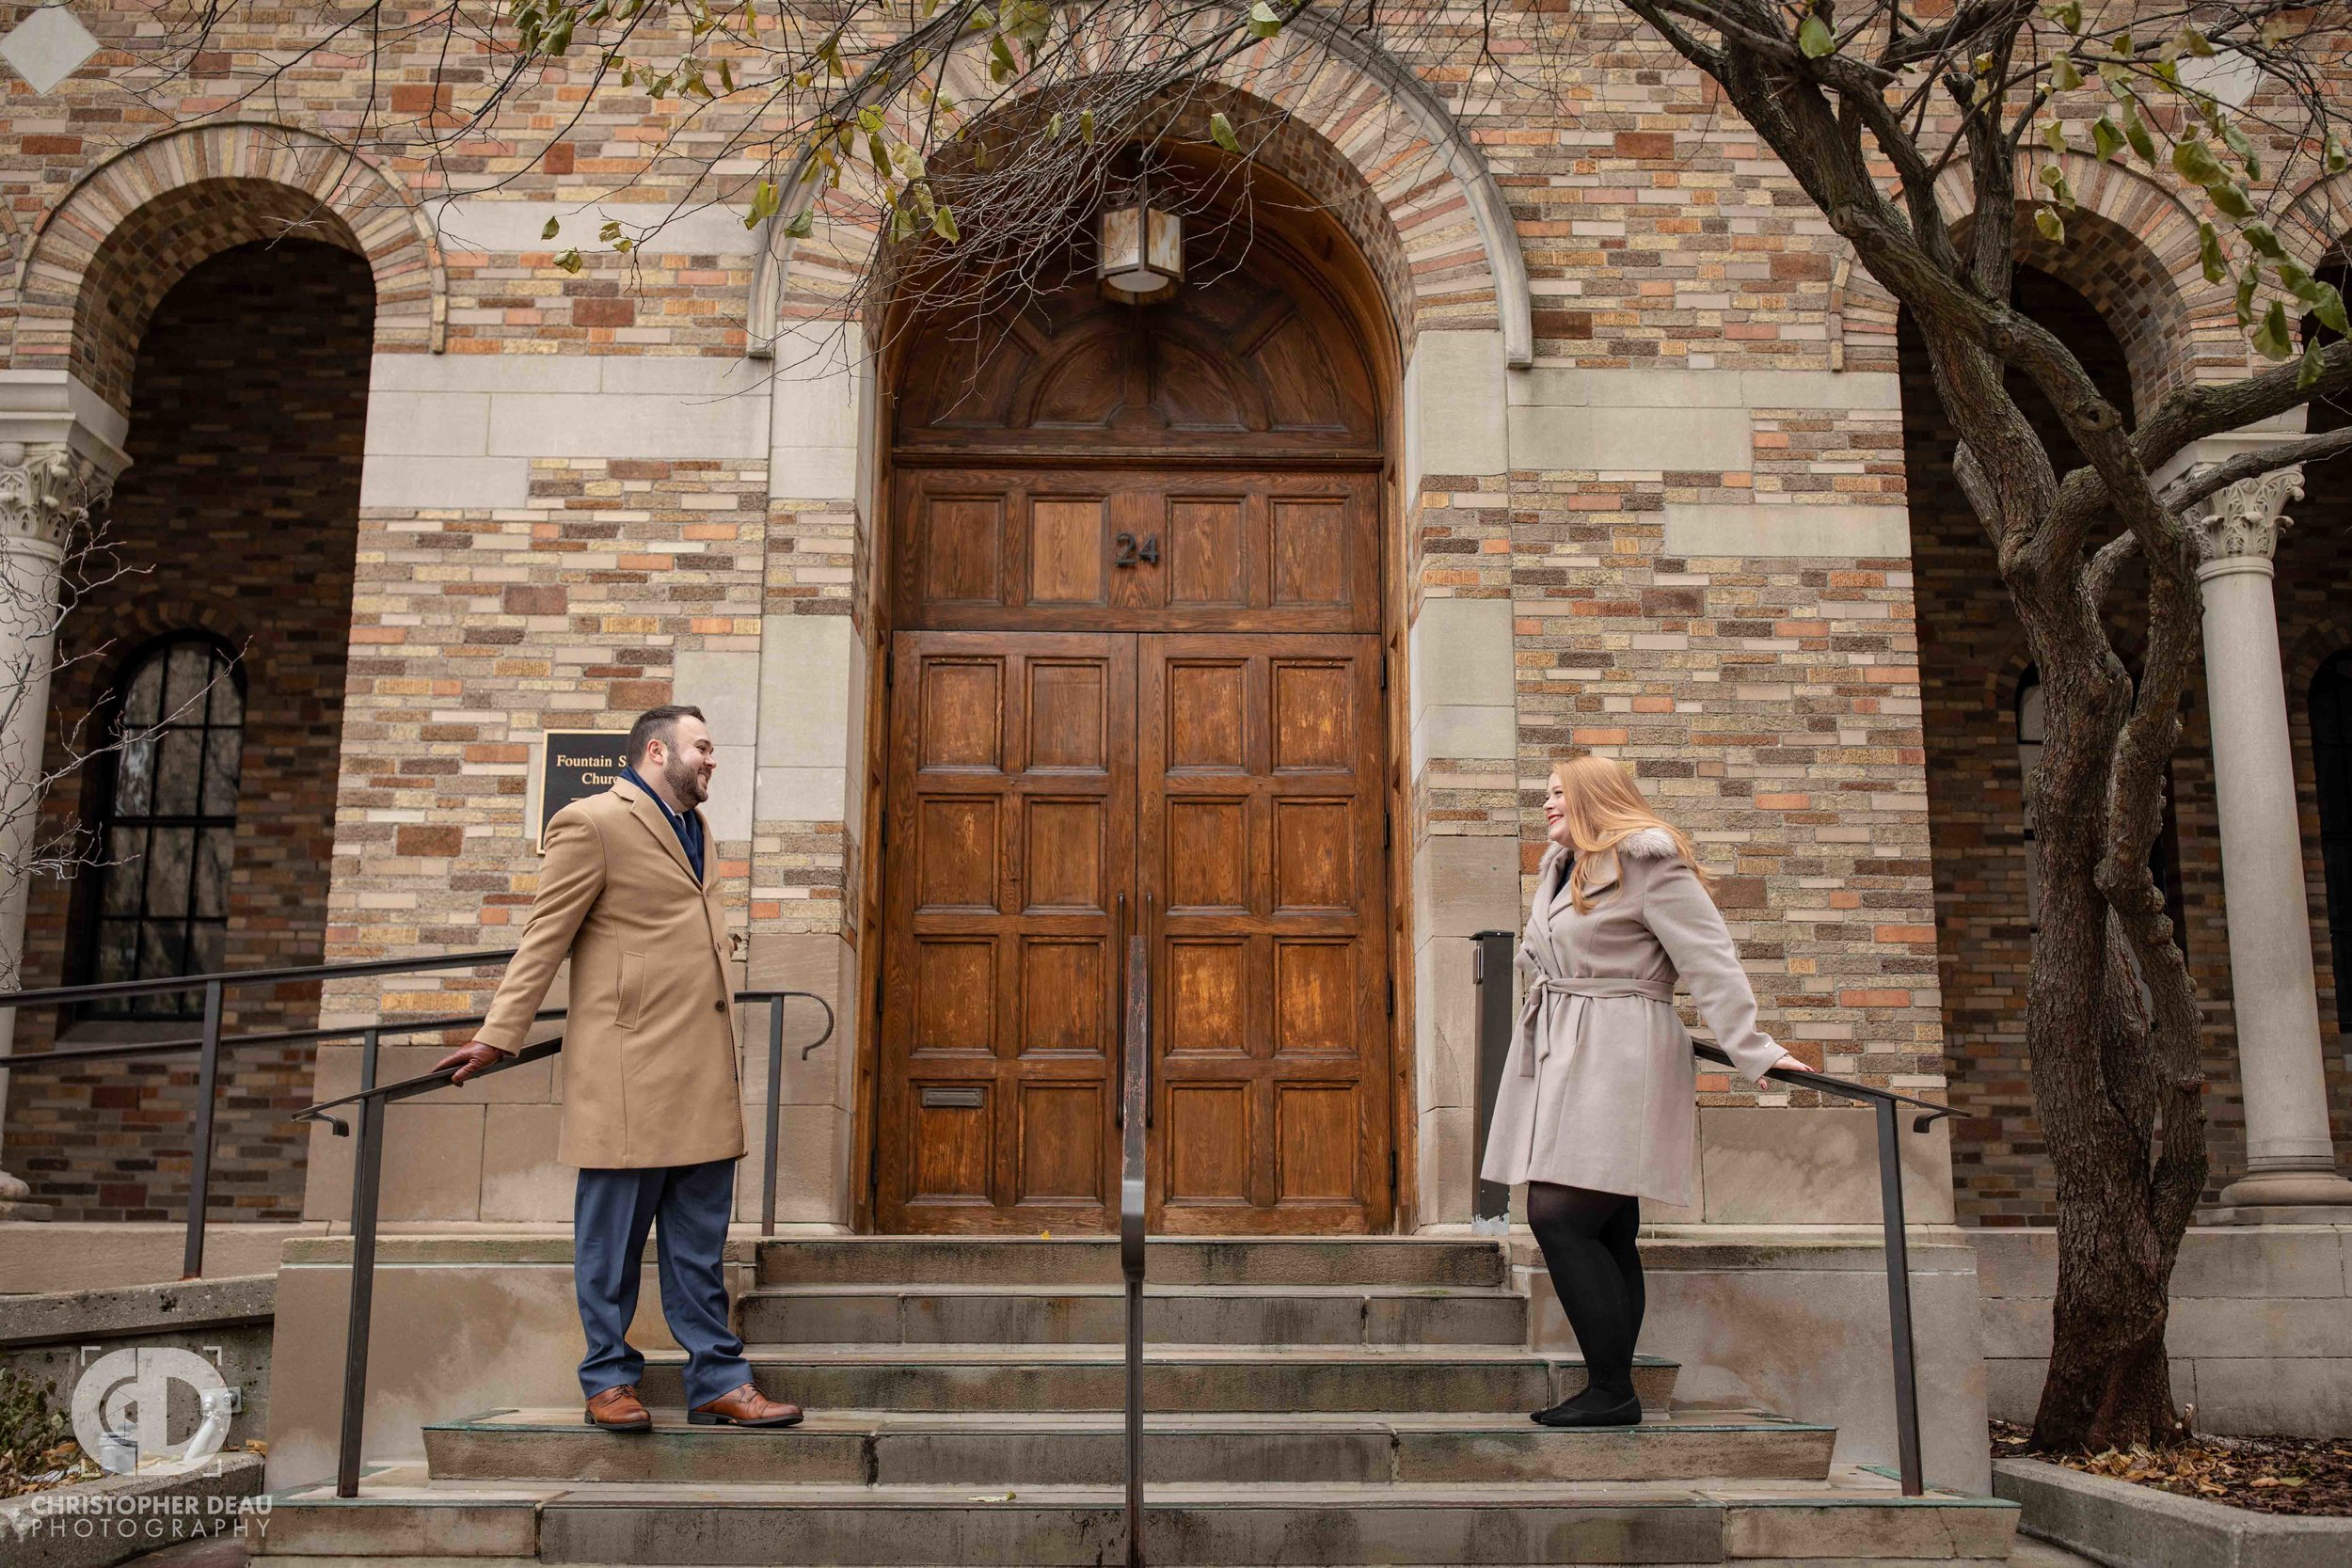  Engagement photos on the steps of the Fountain Street Church in Grand Rapids Michigan 